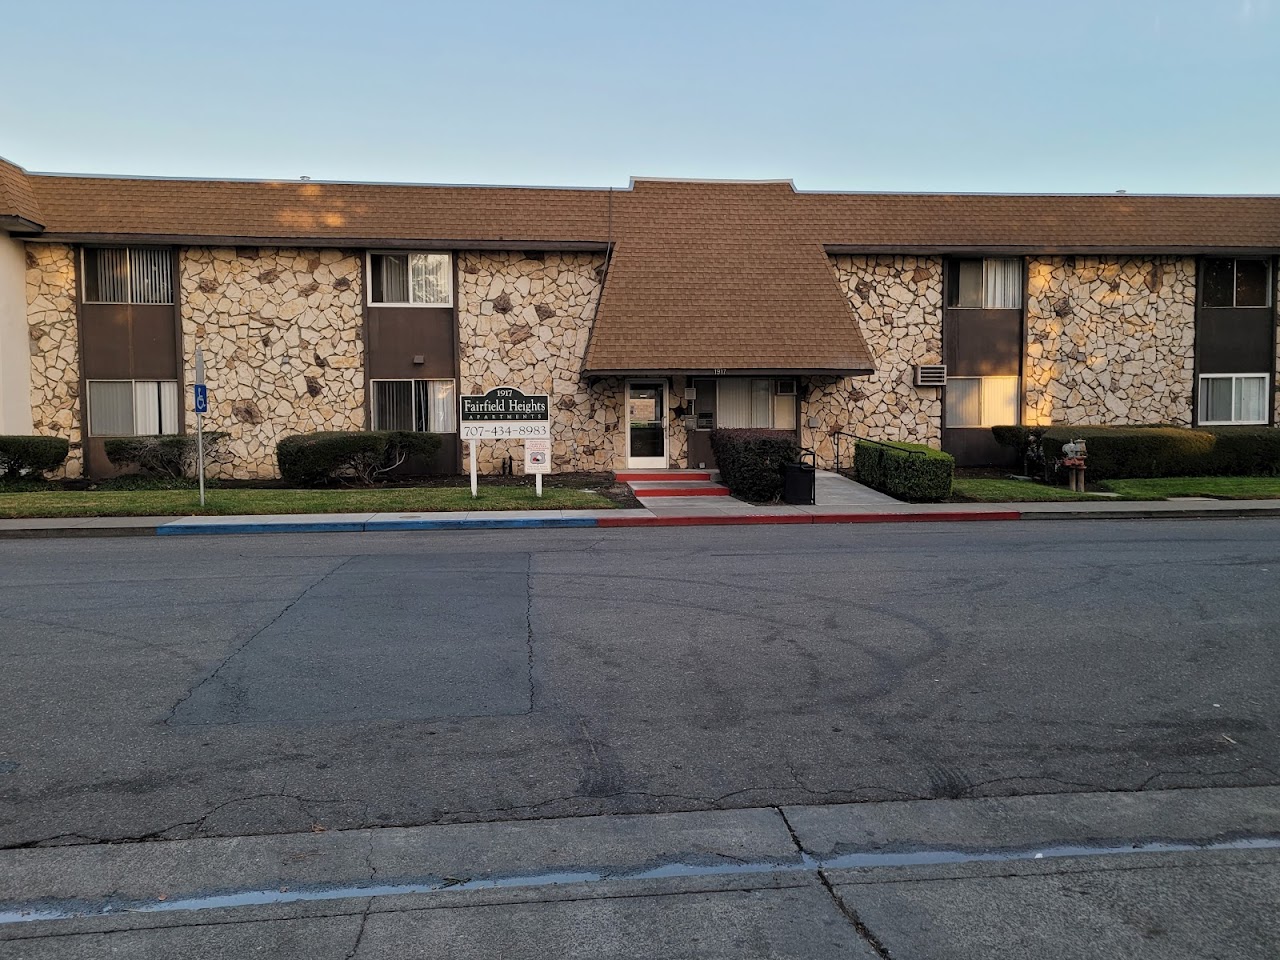 Photo of FAIRFIELD HEIGHTS APTS. Affordable housing located at 1917 GRANDE CIR FAIRFIELD, CA 94533